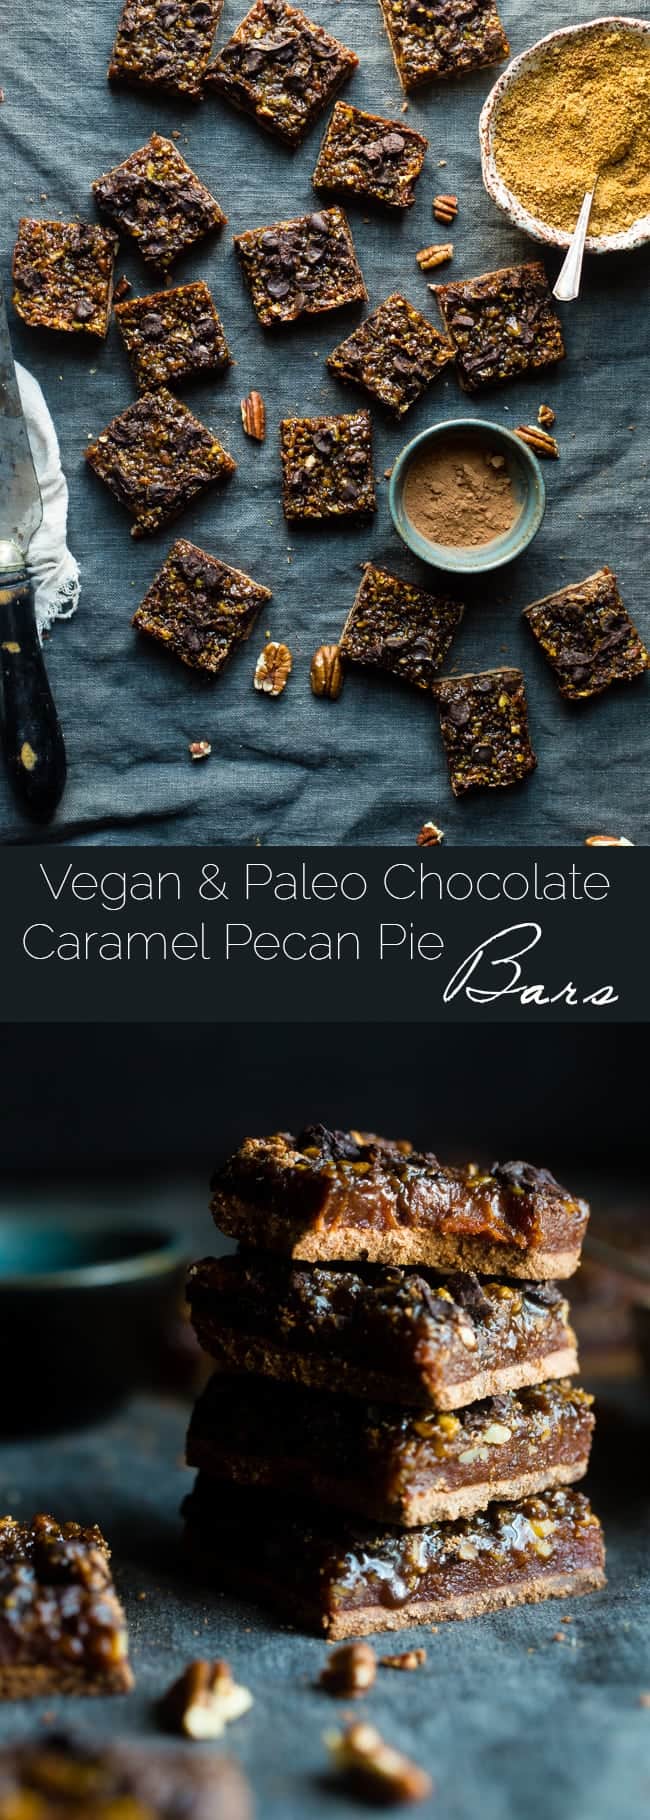 Chocolate Caramel Paleo Pecan Pie Bars - These easy paleo pecan pie bars have a layer of creamy date caramel! They're a vegan friendly and gluten free, healthier dessert for the Holidays! | Foodfaithfitness.com | @FoodFaithFit